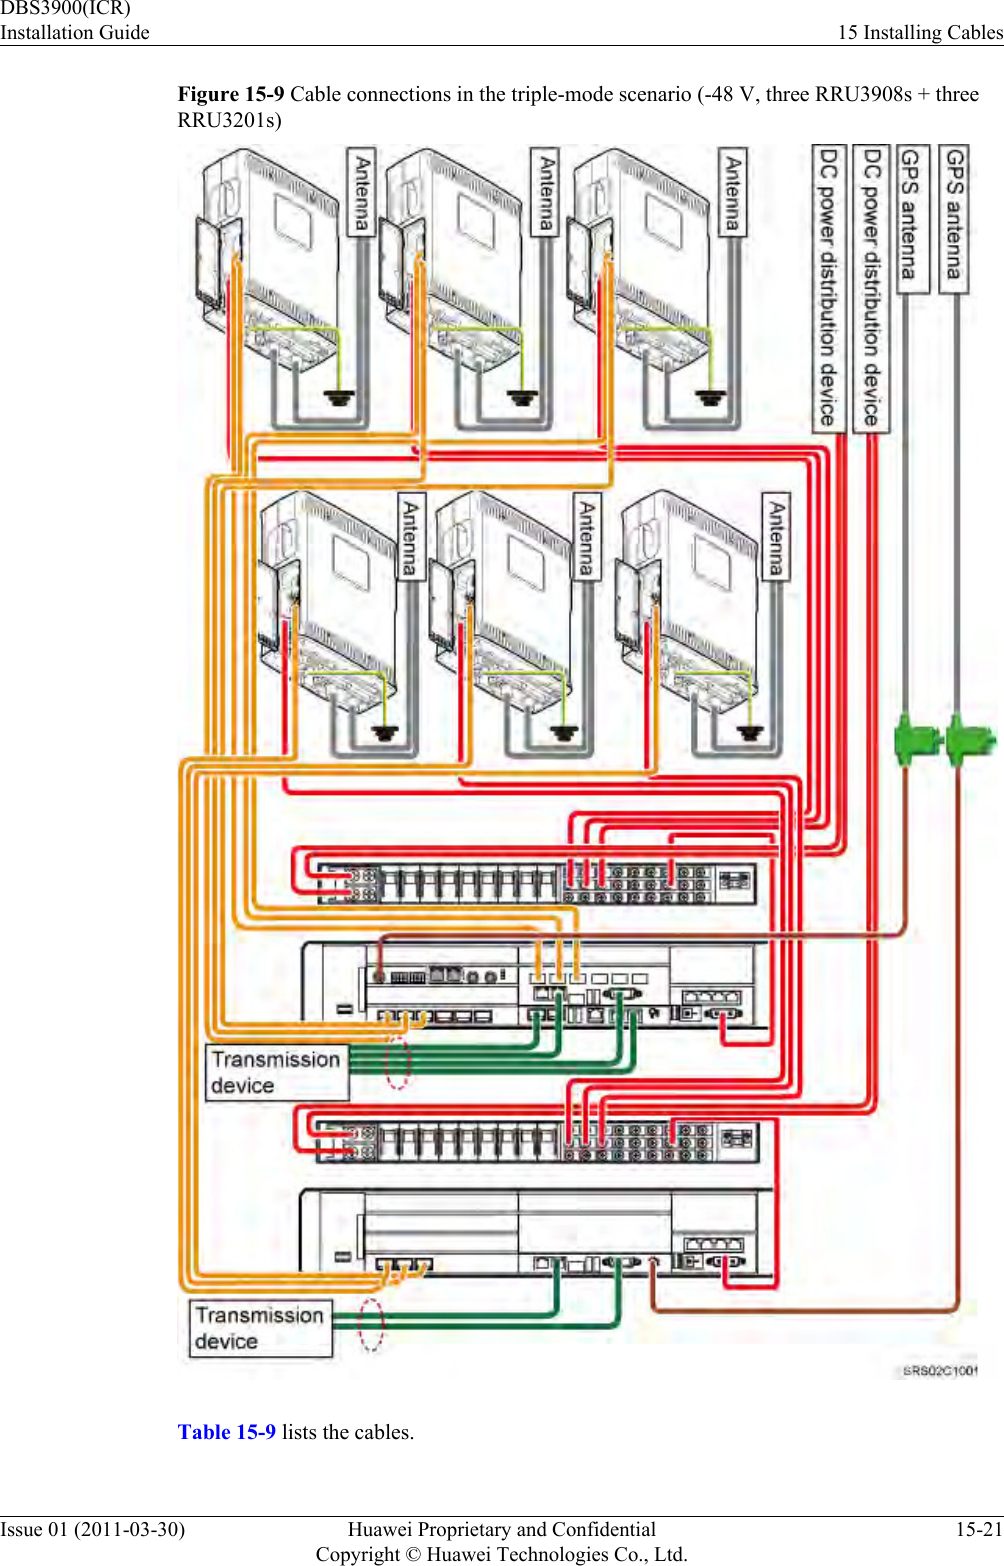 Figure 15-9 Cable connections in the triple-mode scenario (-48 V, three RRU3908s + threeRRU3201s)Table 15-9 lists the cables.DBS3900(ICR)Installation Guide 15 Installing CablesIssue 01 (2011-03-30) Huawei Proprietary and ConfidentialCopyright © Huawei Technologies Co., Ltd.15-21